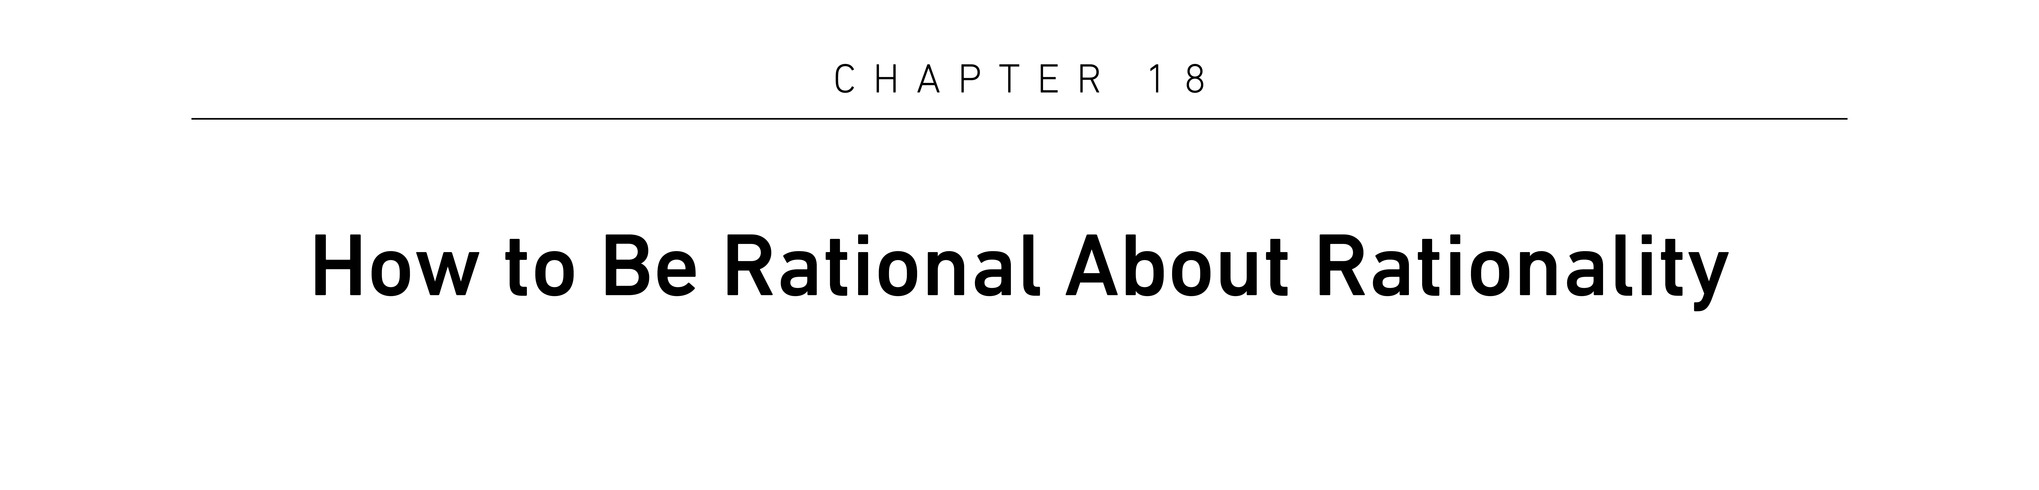 Chapter 18 How to Be Rational About Rationality